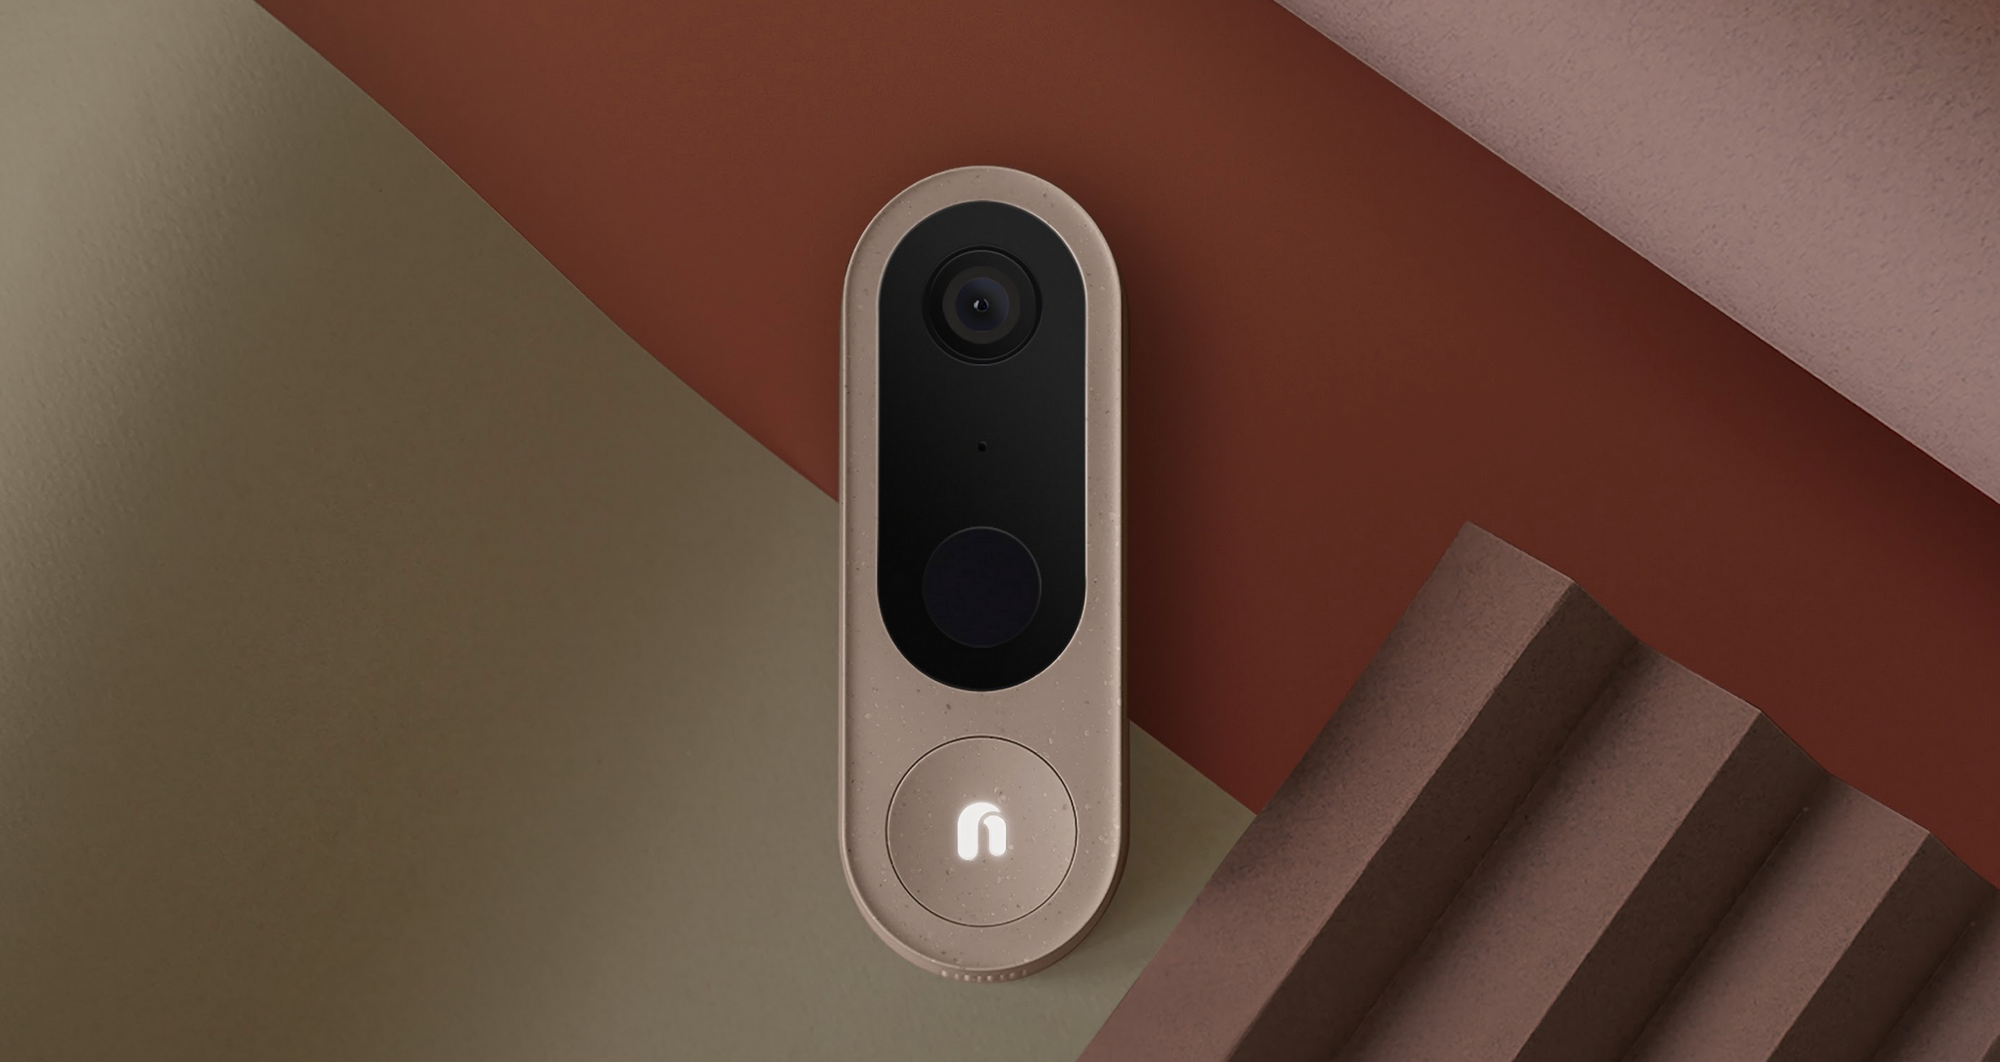 "Nooie Cam Doorbell checks off all the boxes," says KnowTechie